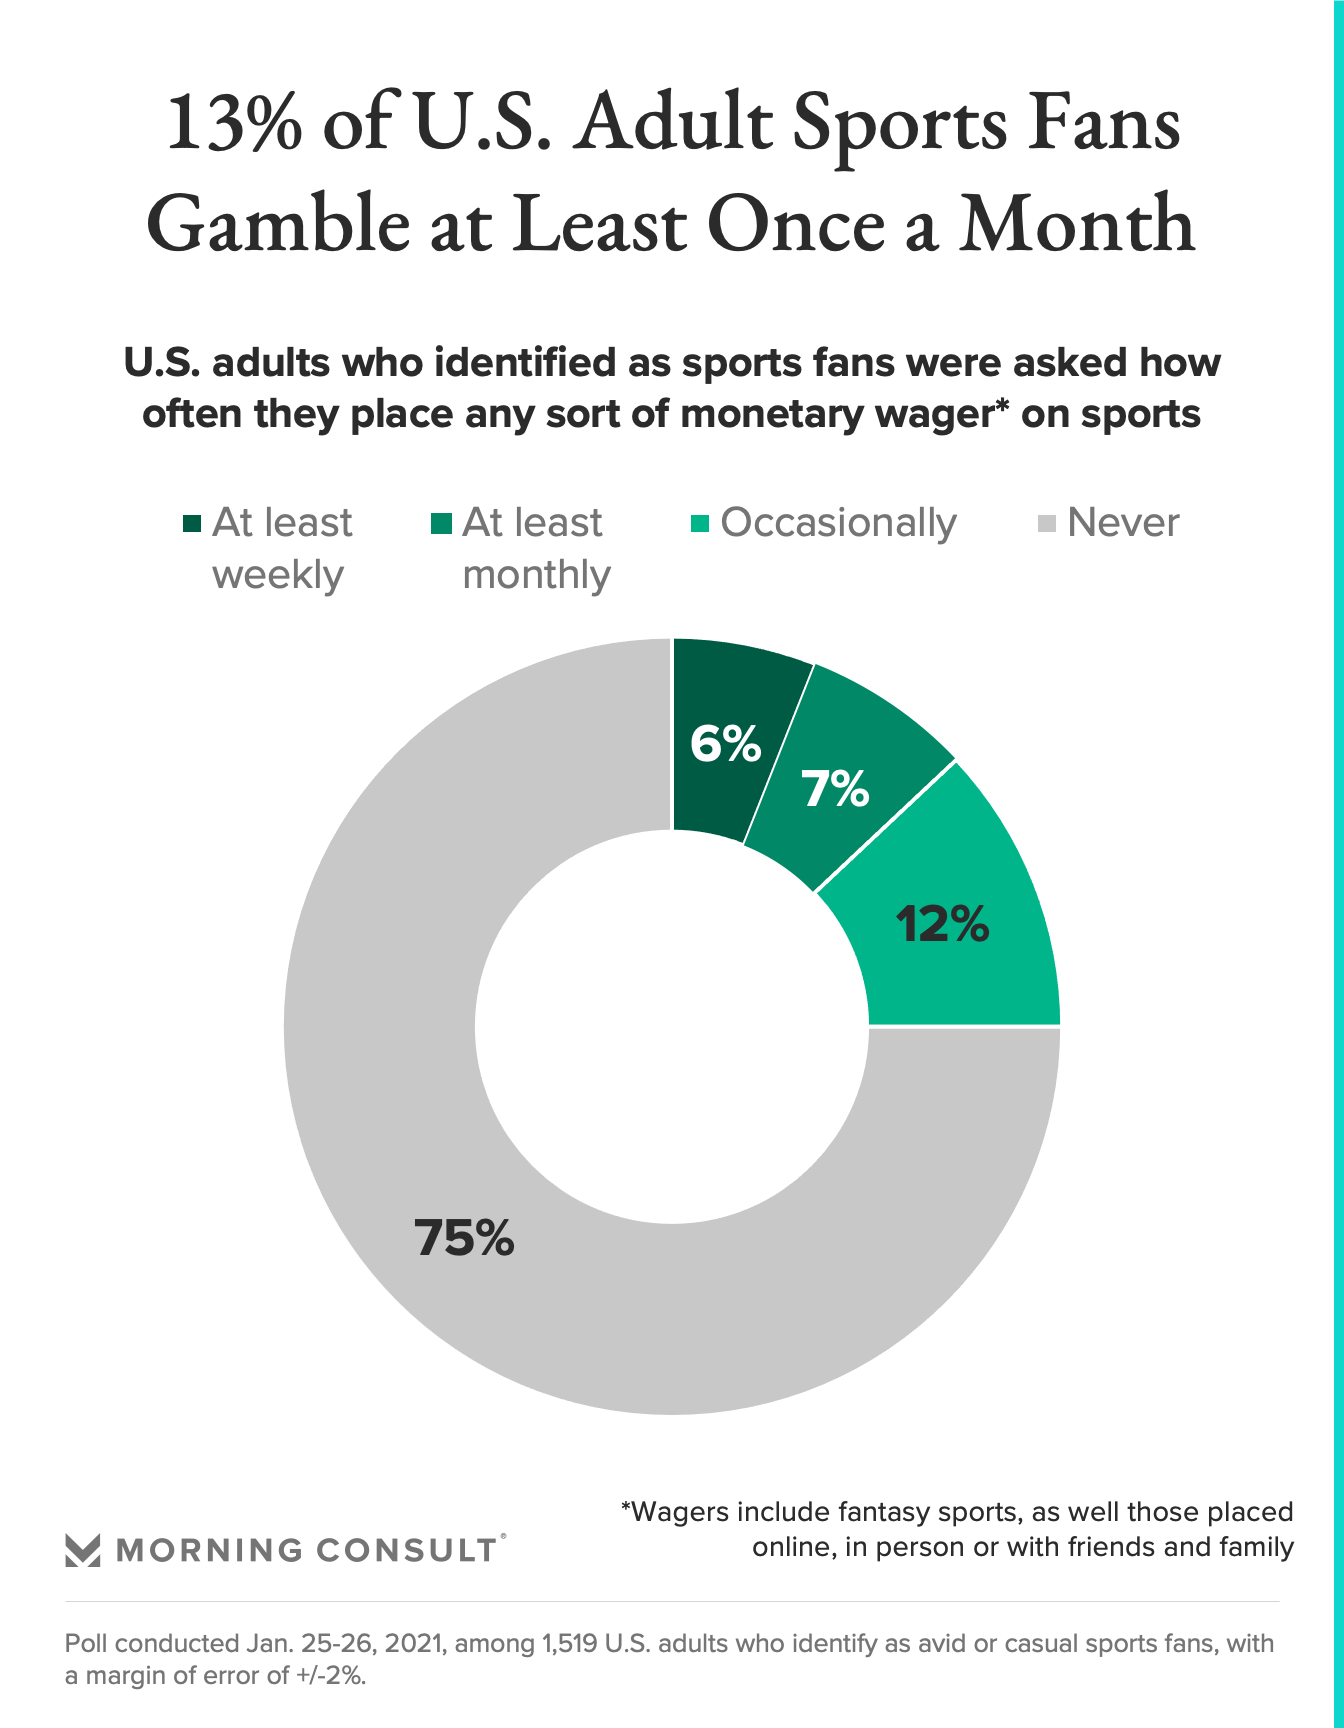 global sports betting industry overview